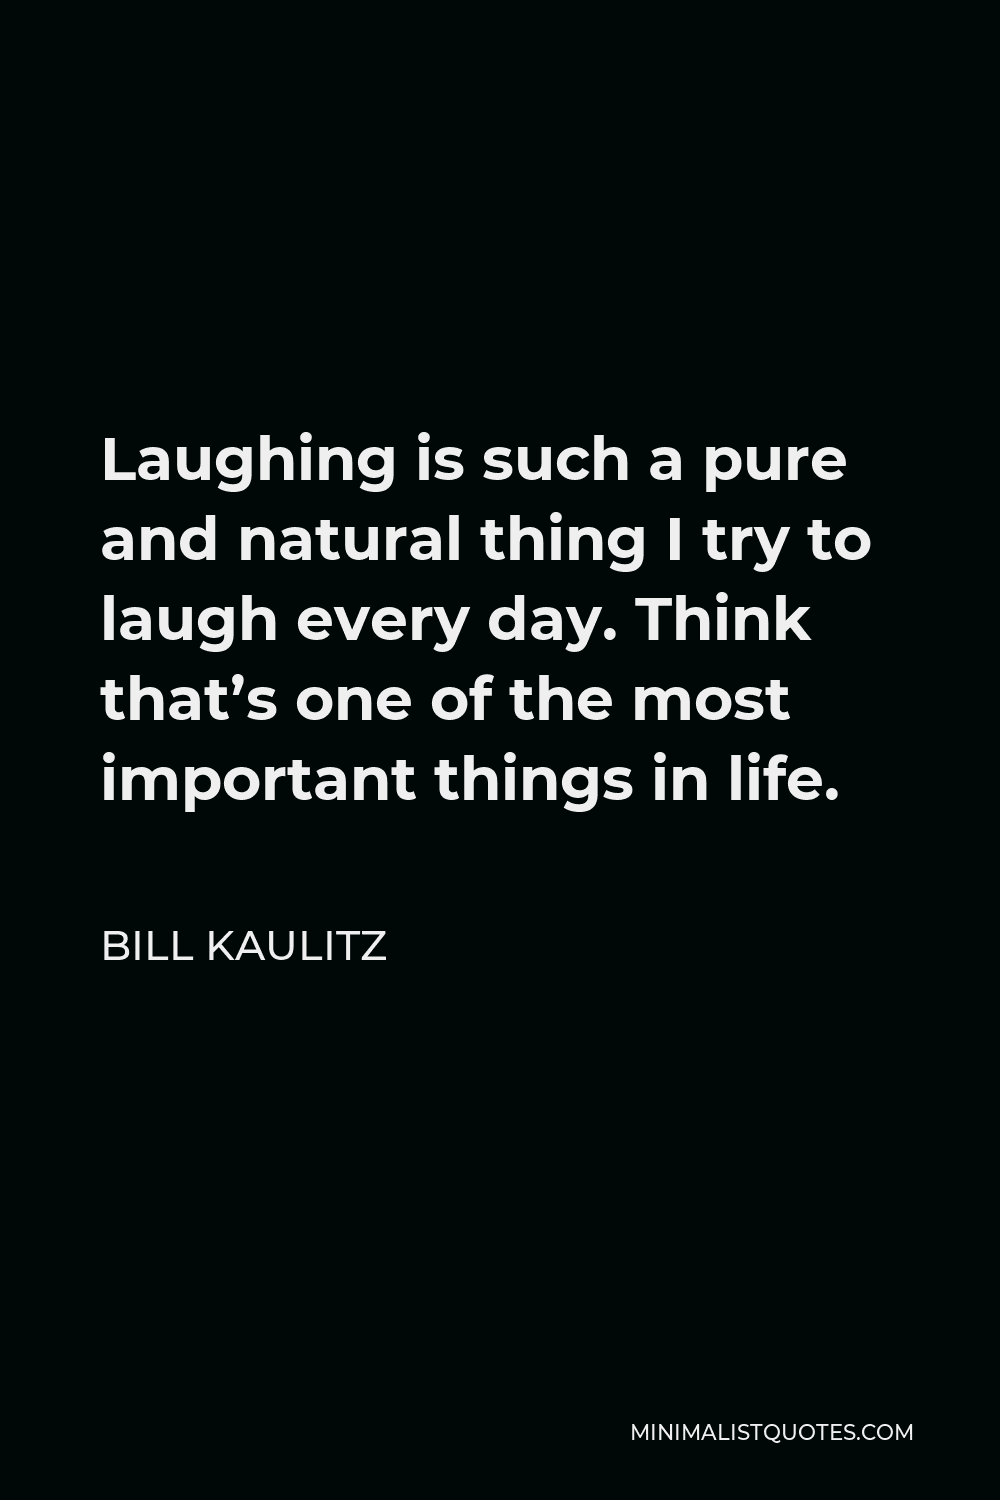 Bill Kaulitz Quote - Laughing is such a pure and natural thing I try to laugh every day. Think that’s one of the most important things in life.